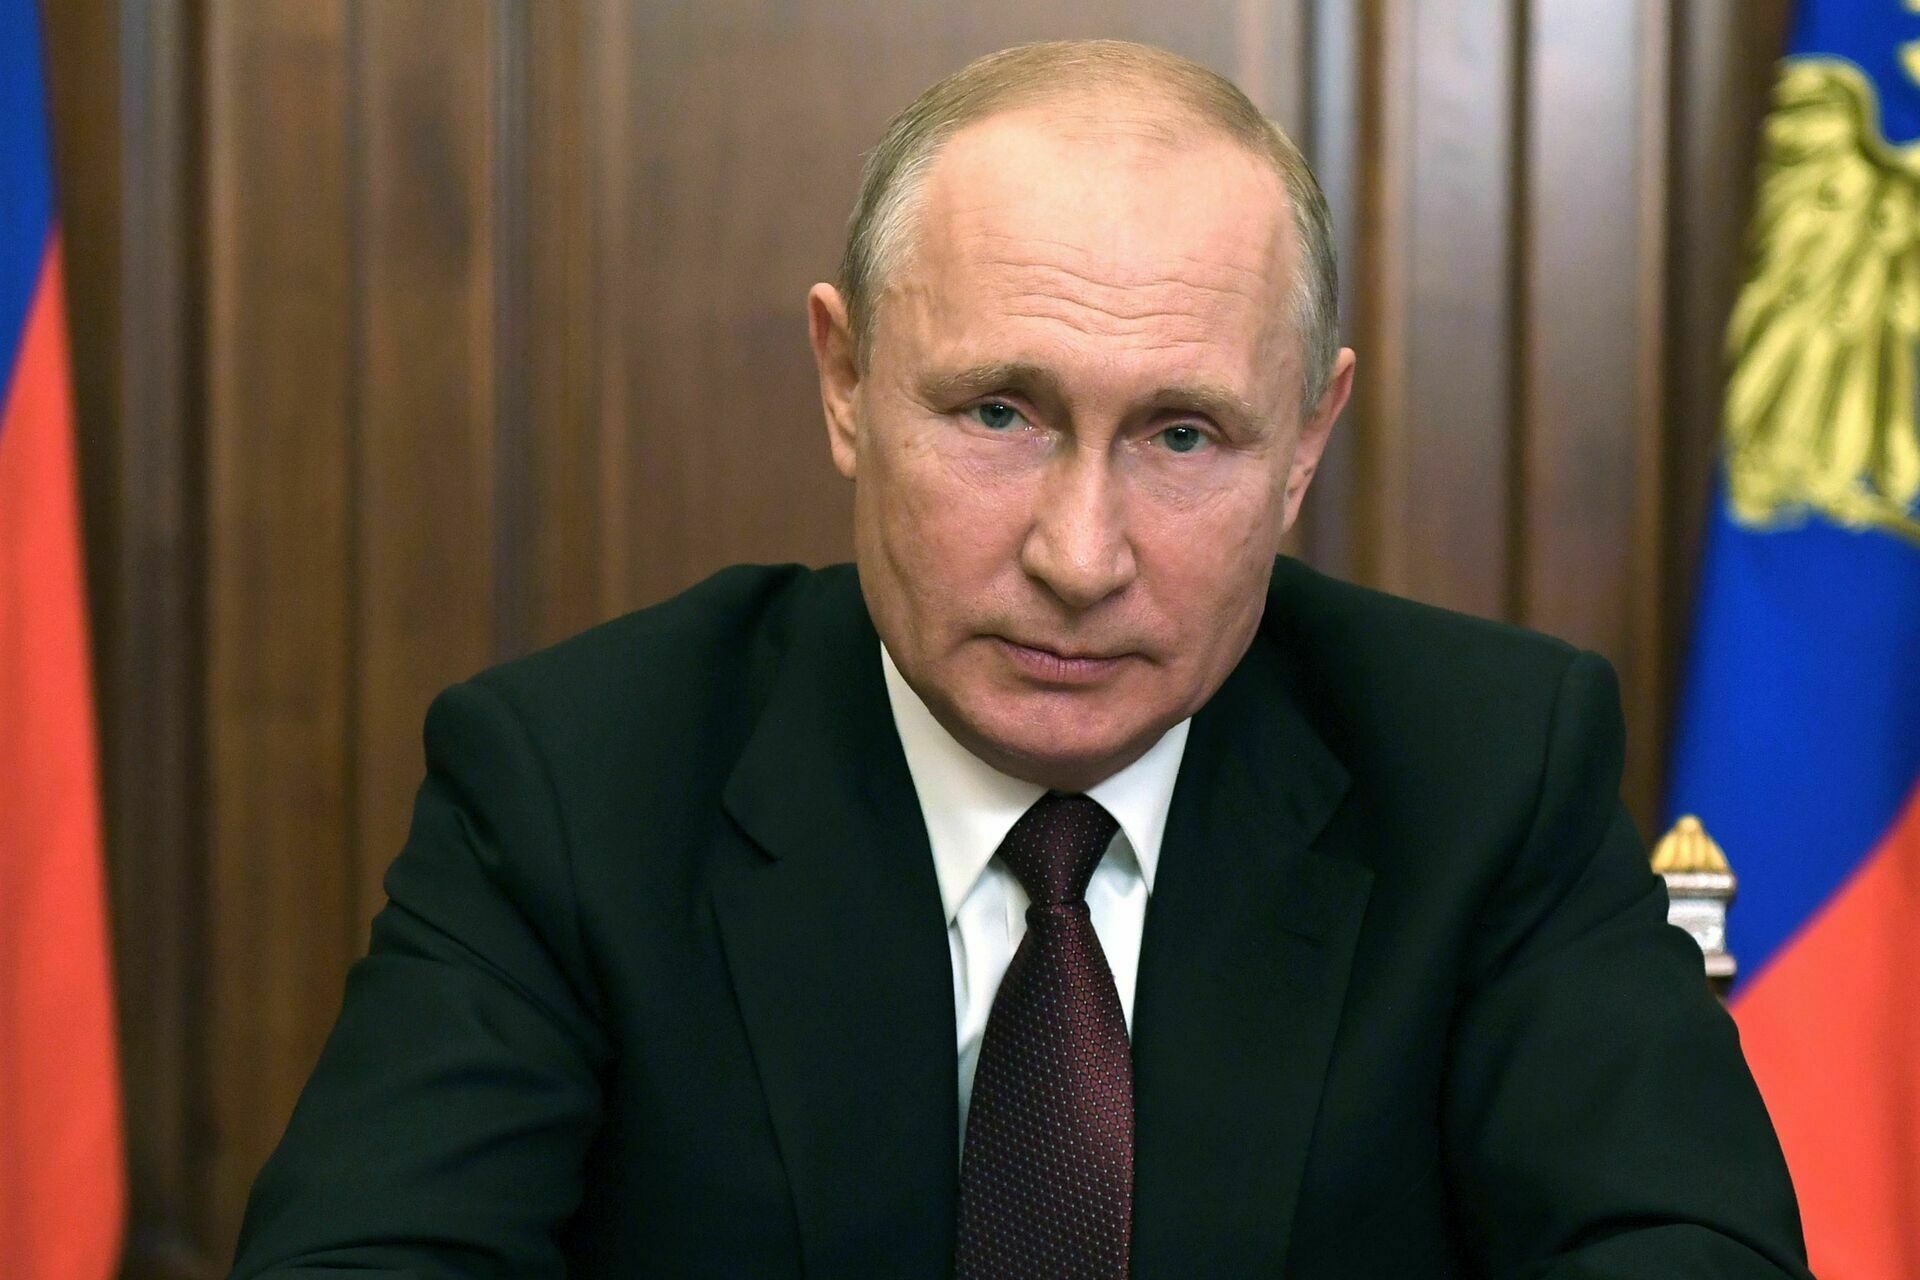 Vladimir Putin signed a decree on partial mobilization in the country